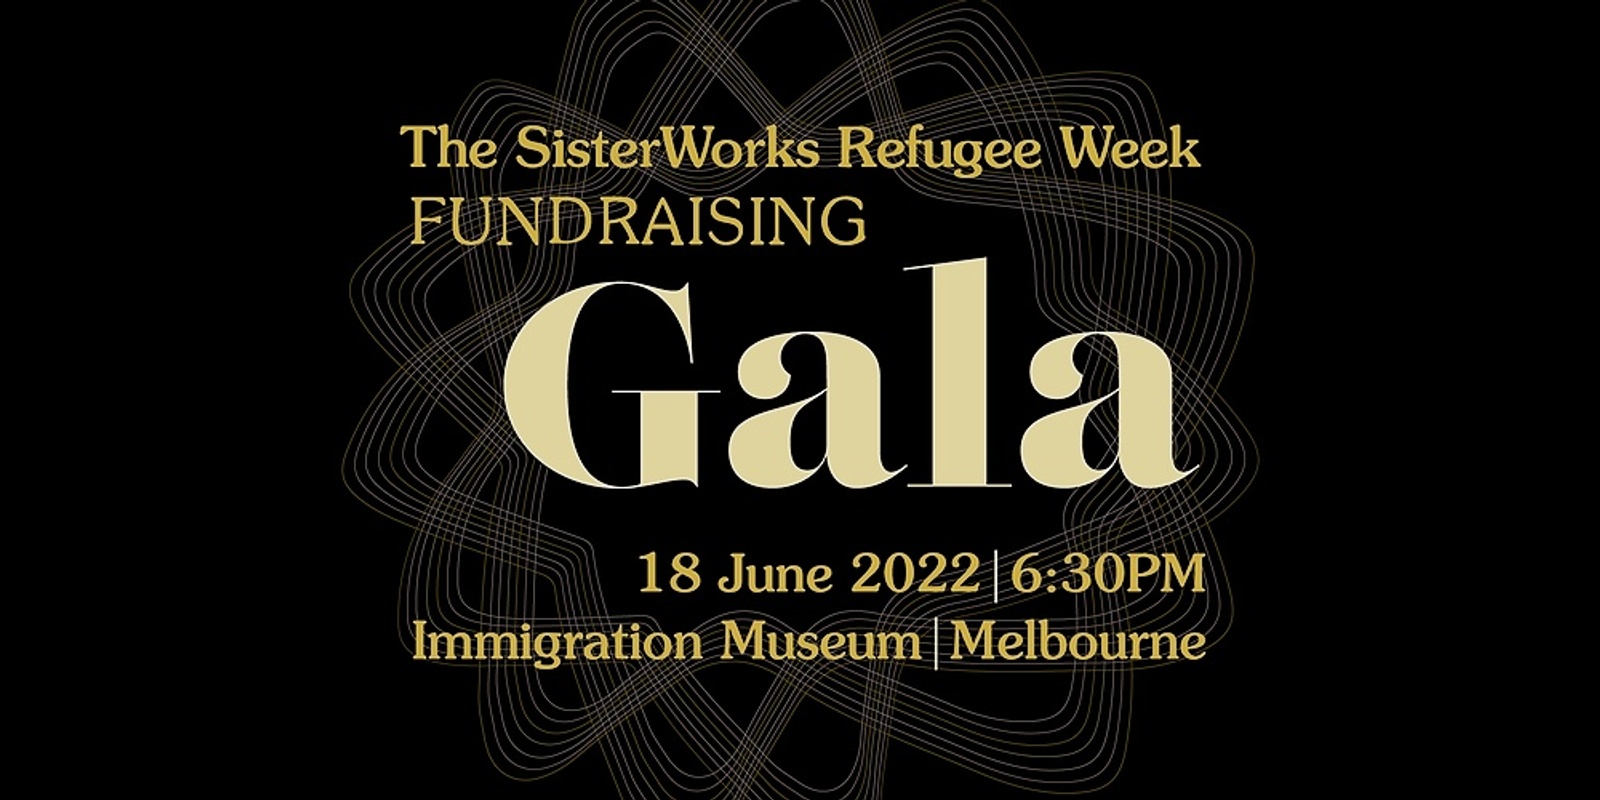 Banner image for The SisterWorks Refugee Week Fundraising Gala 